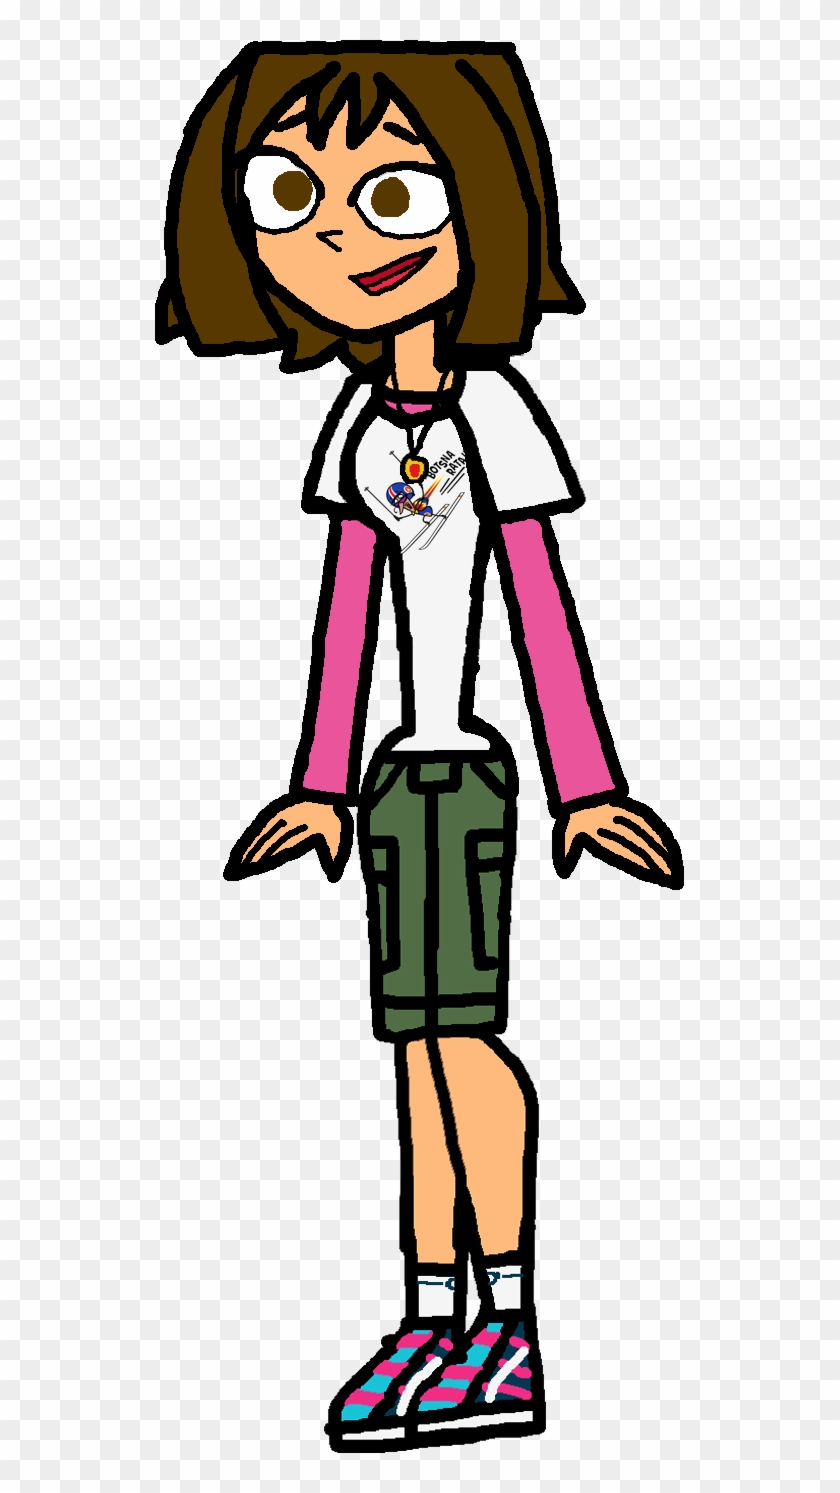 Pookza In The 10th Anniversary Of Total Drama - Pookza In The 10th Anniversary Of Total Drama #765538